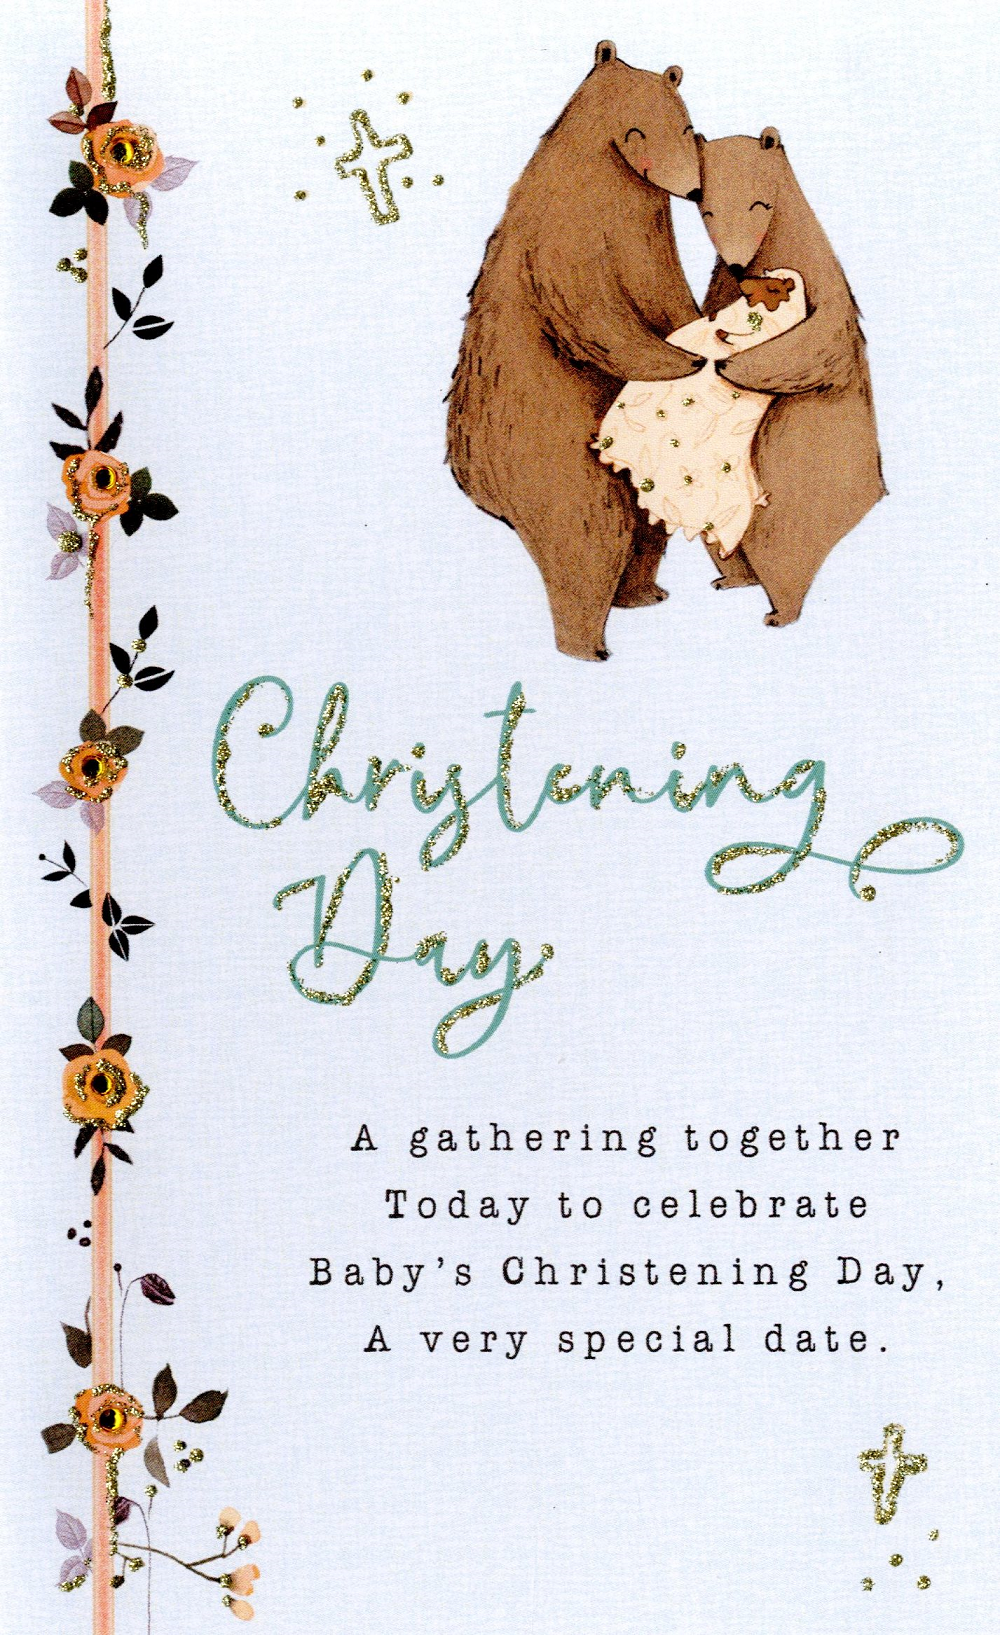 A Very Special Date Embellished Christening Greeting Card